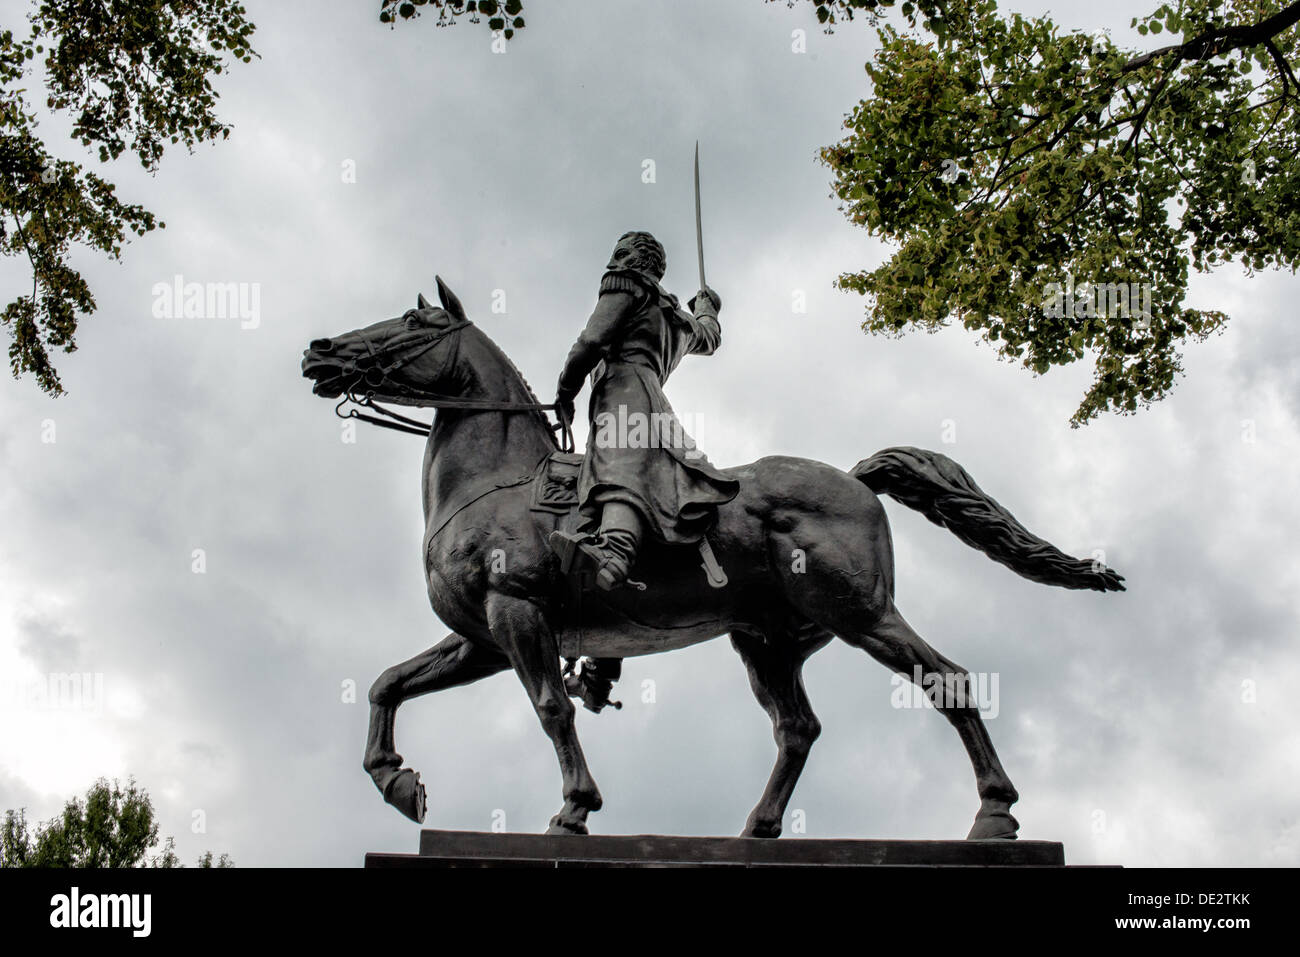 WASHINGTON DC, USA - A large statue of Venezuelan leader Simon Bolivar, by Felix de Weldon, that stands in a park in front of the Interior Department in Foggy Bottom in northwest Washington DC. The statue was installed as a gift of the Venezuelan Government in 1955 and is formally titled Equestrian of Simon Bolivar. Stock Photo